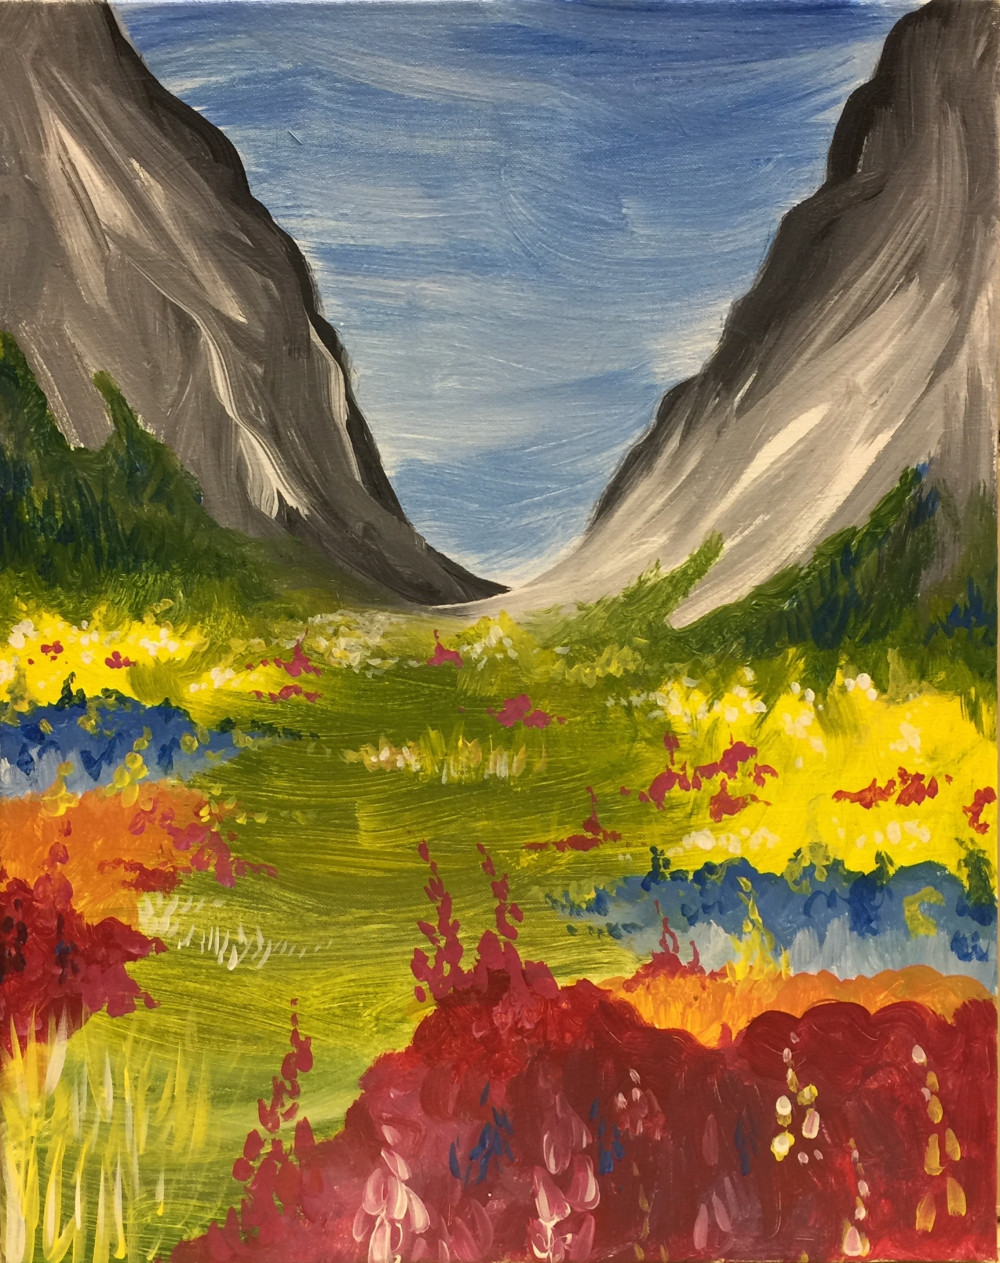 #20 - Mountain Floral Valley